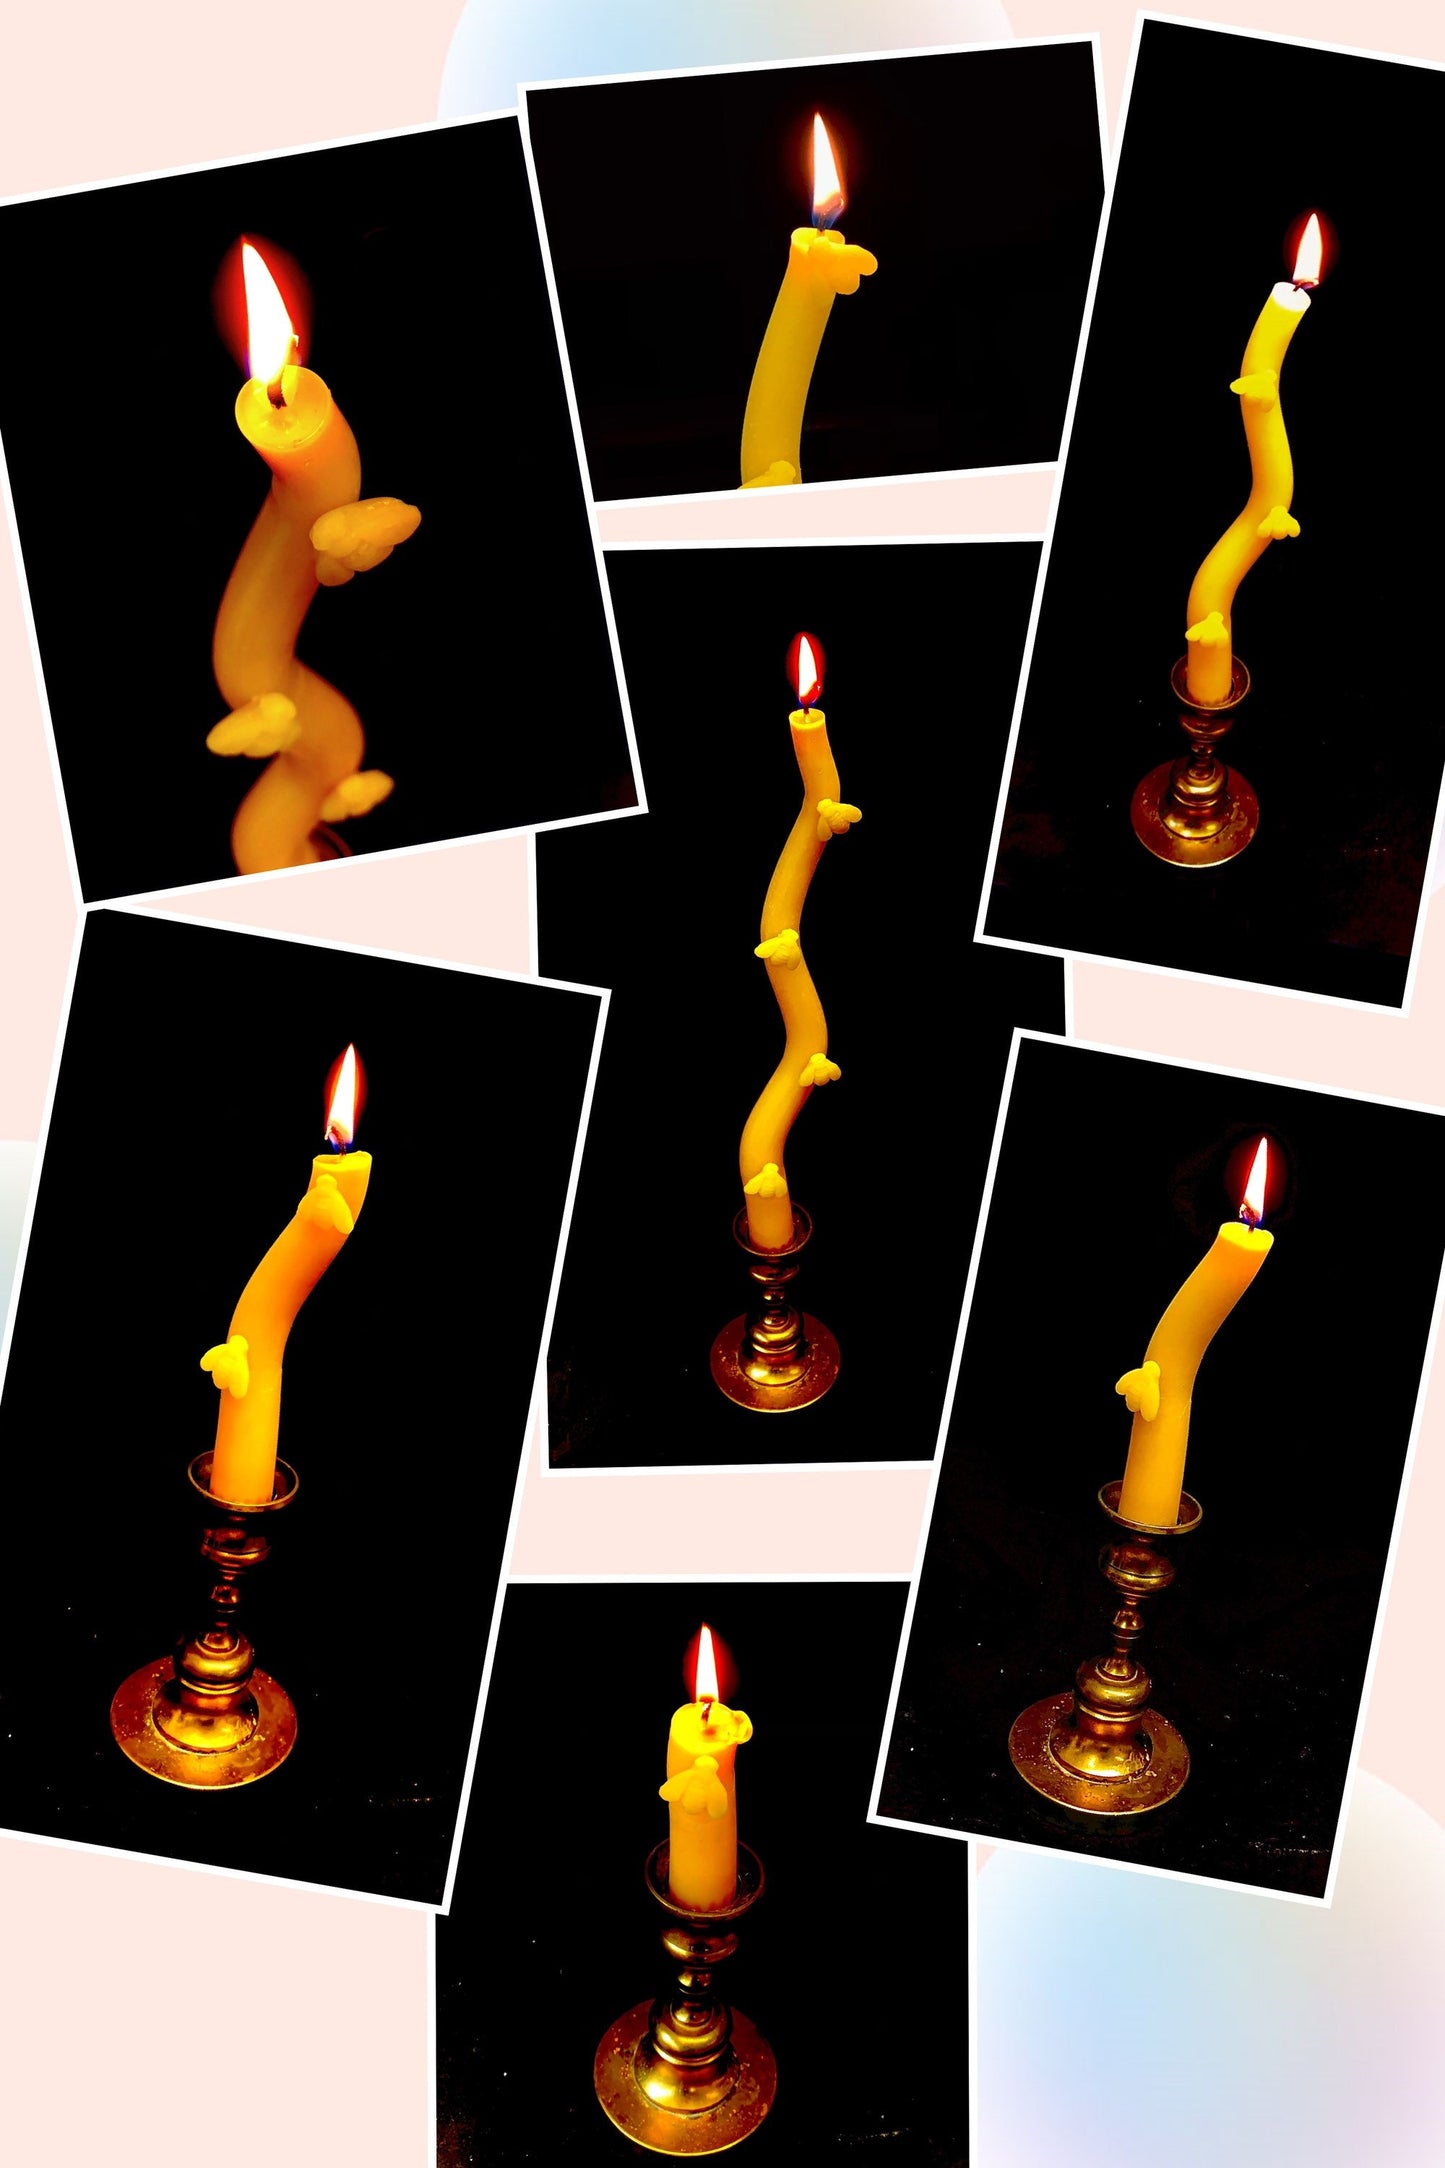 2 Beeswax taper candles - candle pair - Pure beeswax dinner candles - dripless candles - dancing bee taper - decorative candles - 11.5”